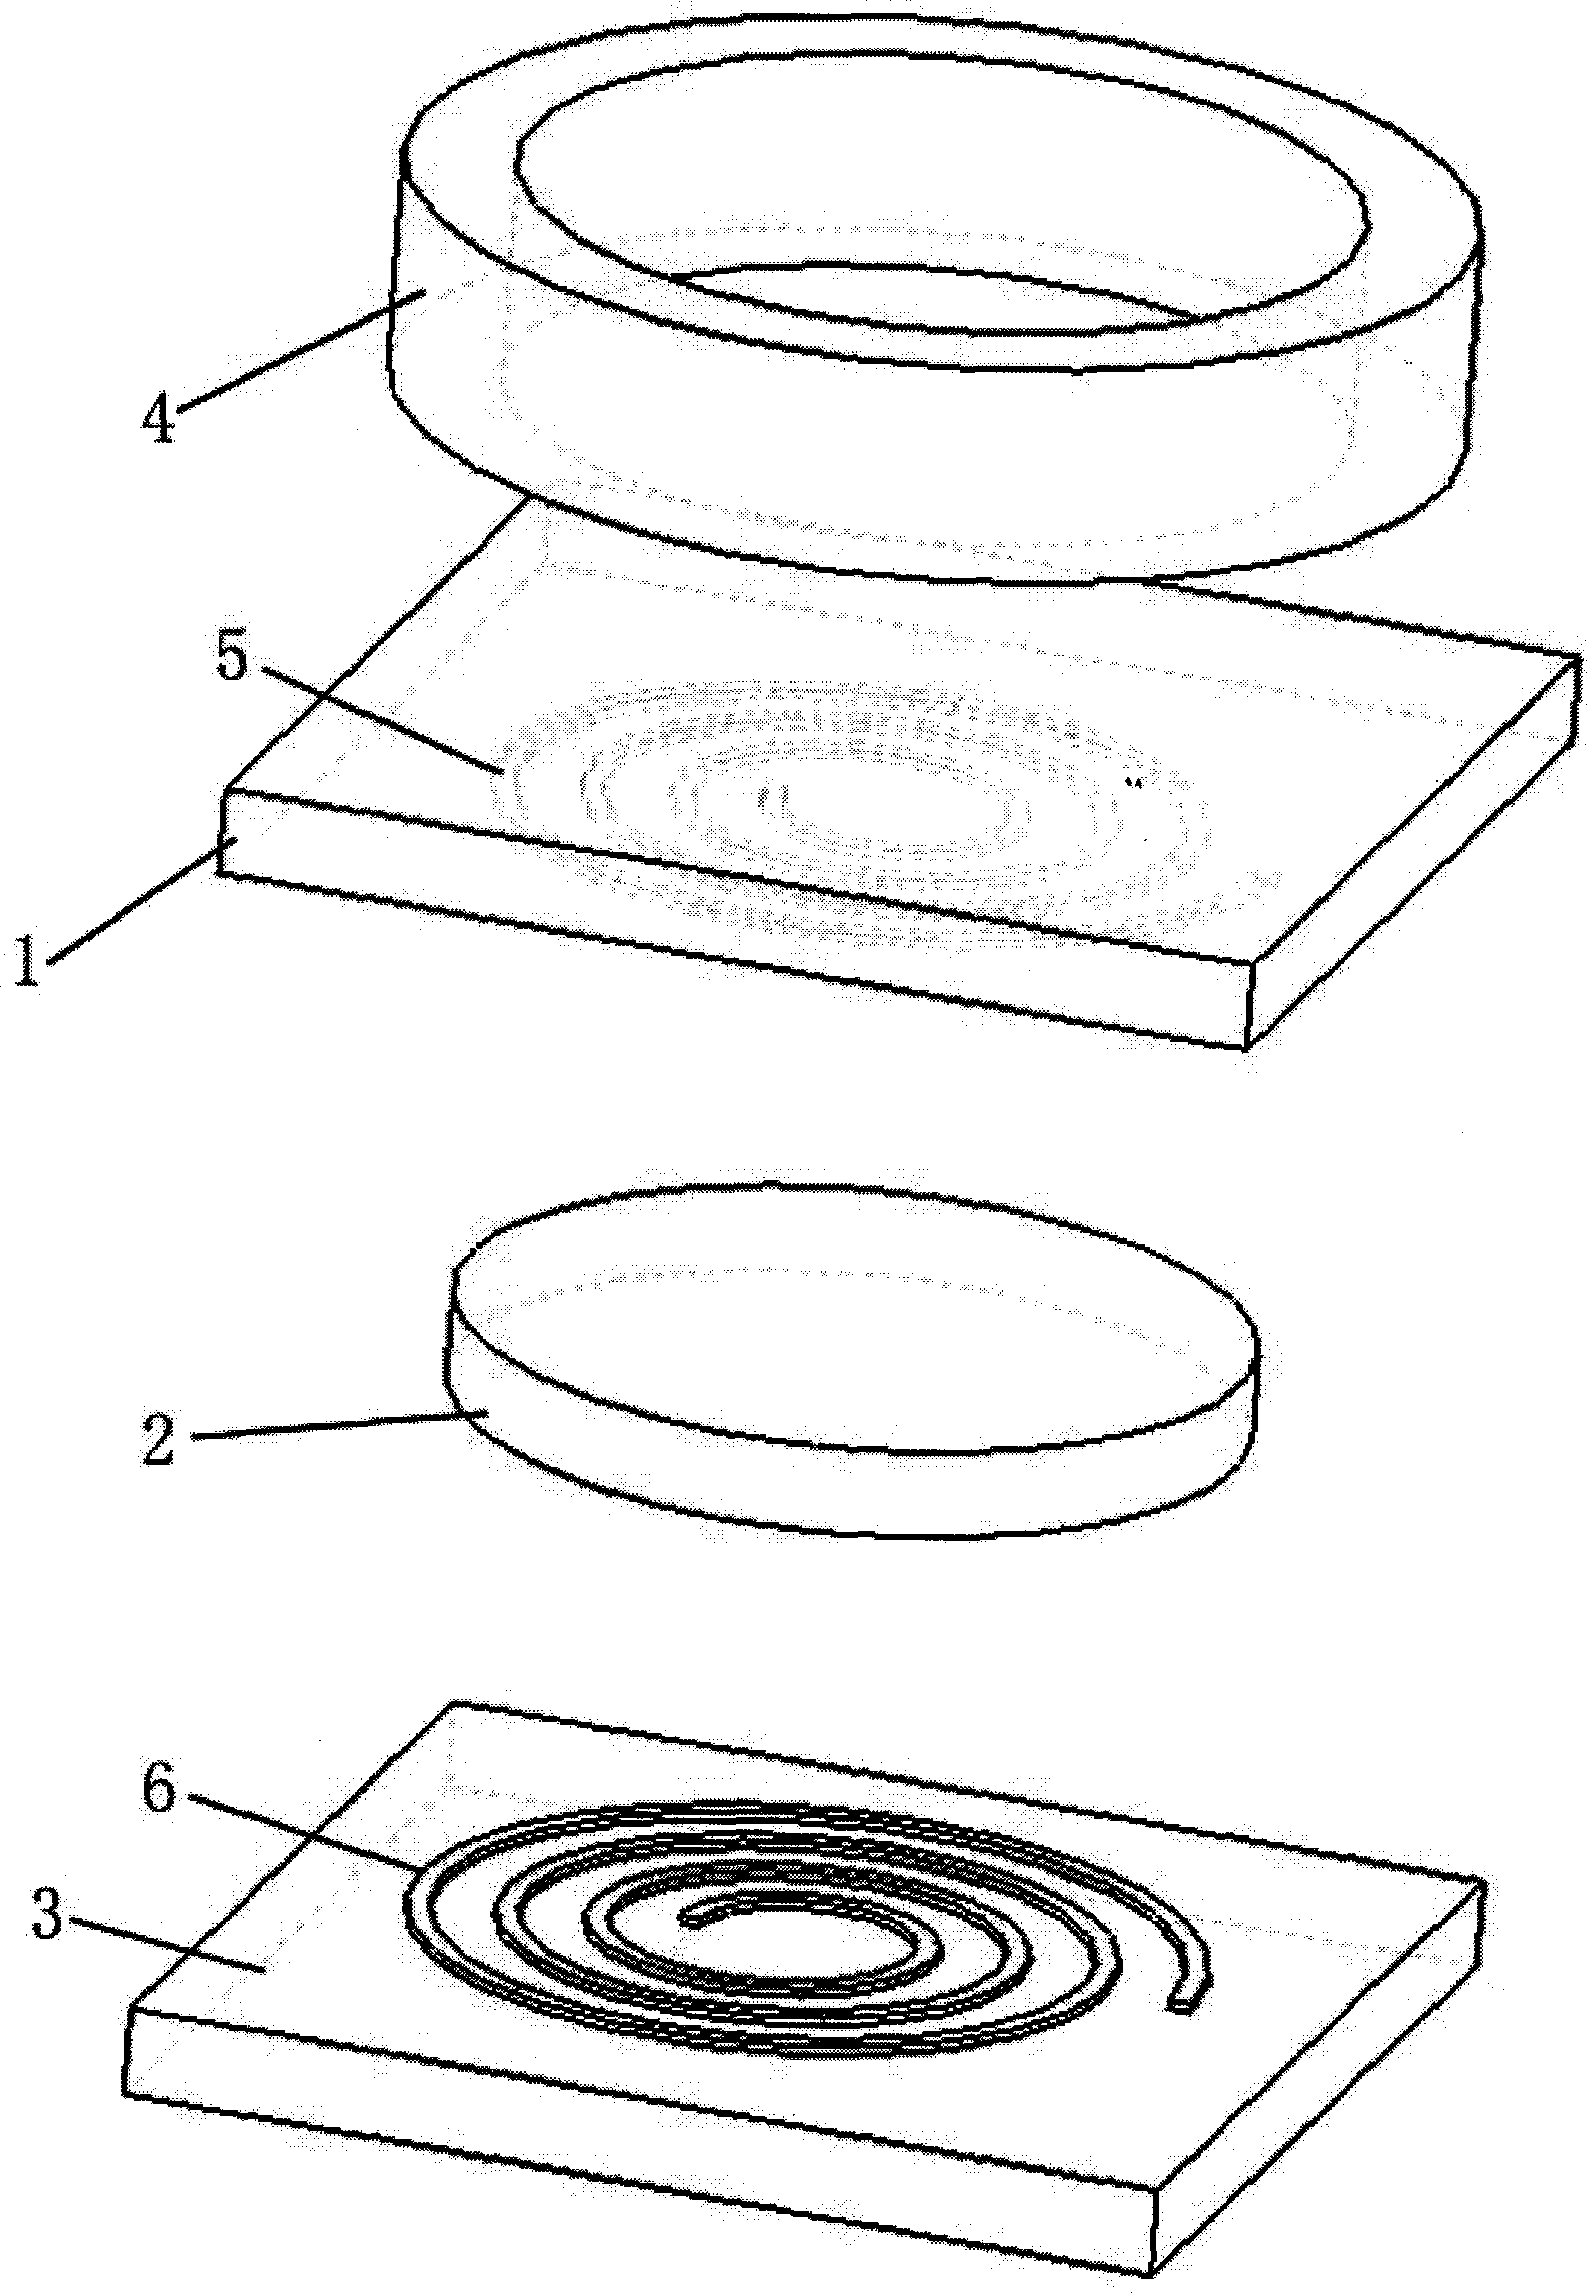 Micro-electro-mechanical system (MEMS)-based vibration energy acquisition device